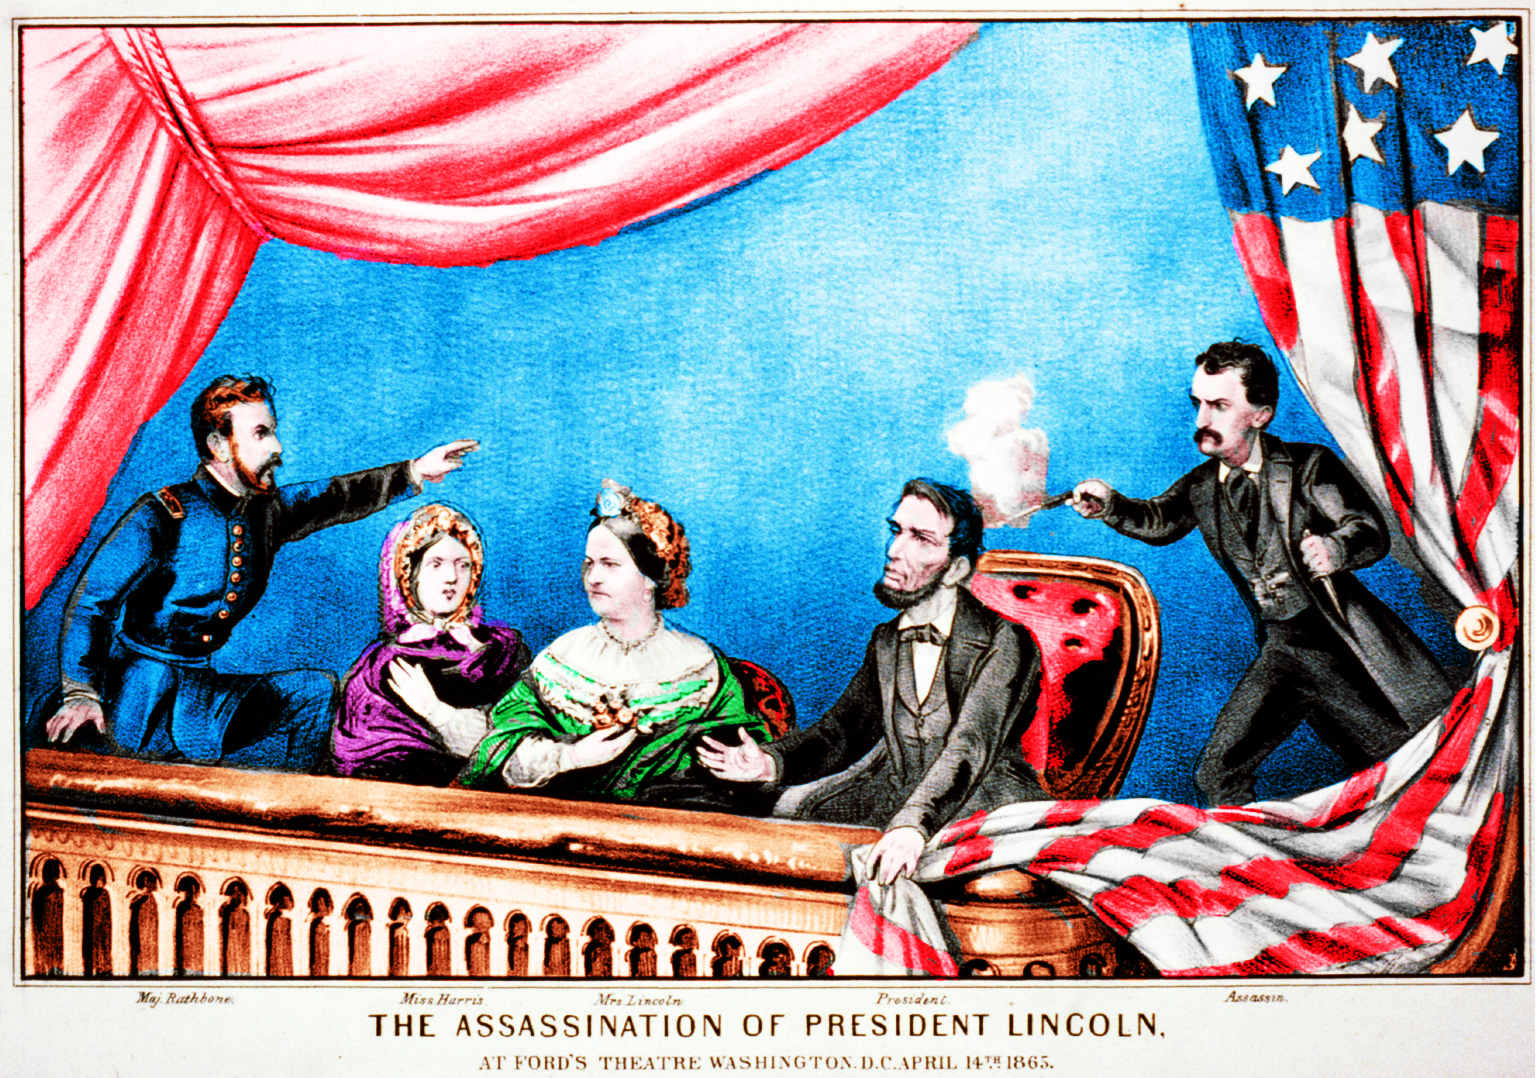 President Abraham Lincoln dies after being shot the previous evening by actor John Wilkes Booth - Vice President Andrew Johnson becomes President upon Lincoln's death on April 15, 1865